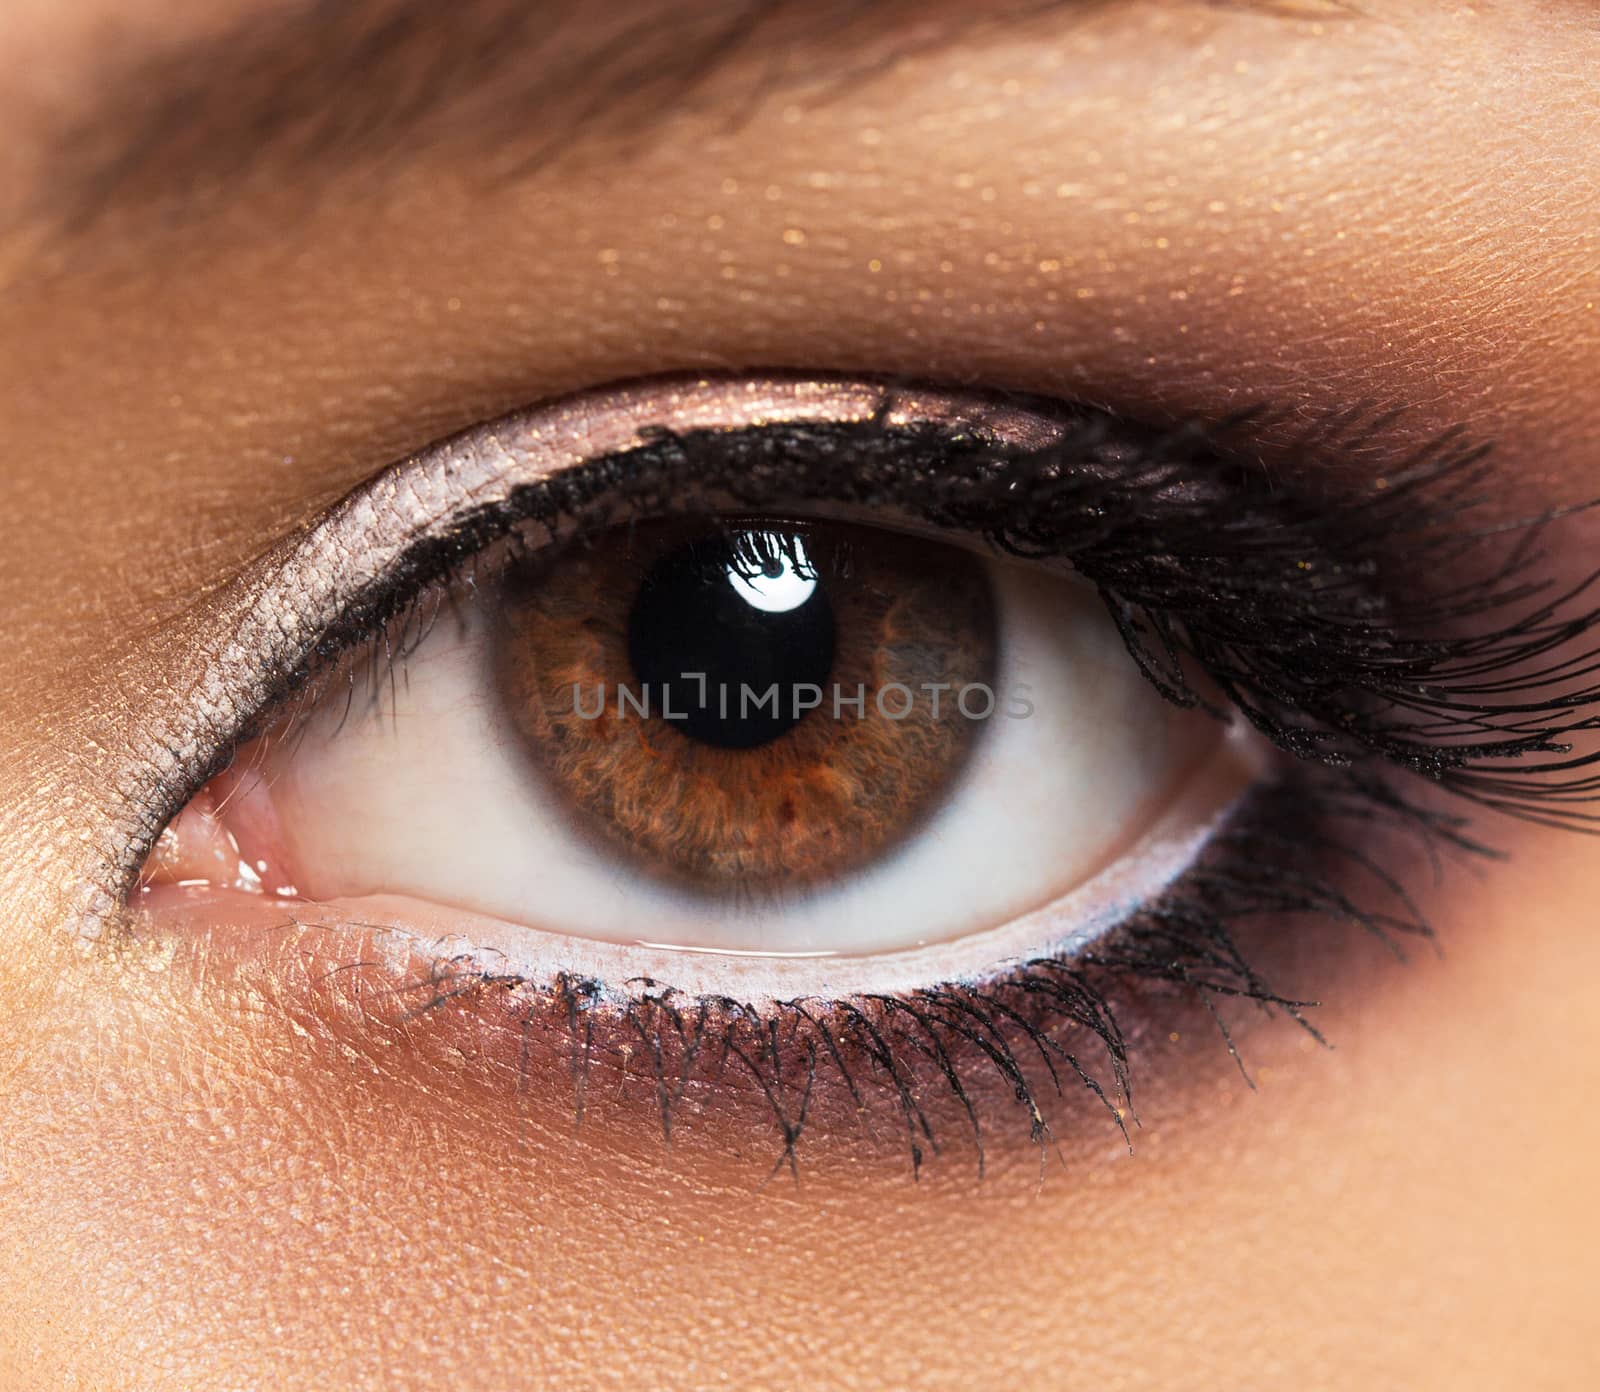 Closeup of womanish eye with glamorous makeup by vlad_star